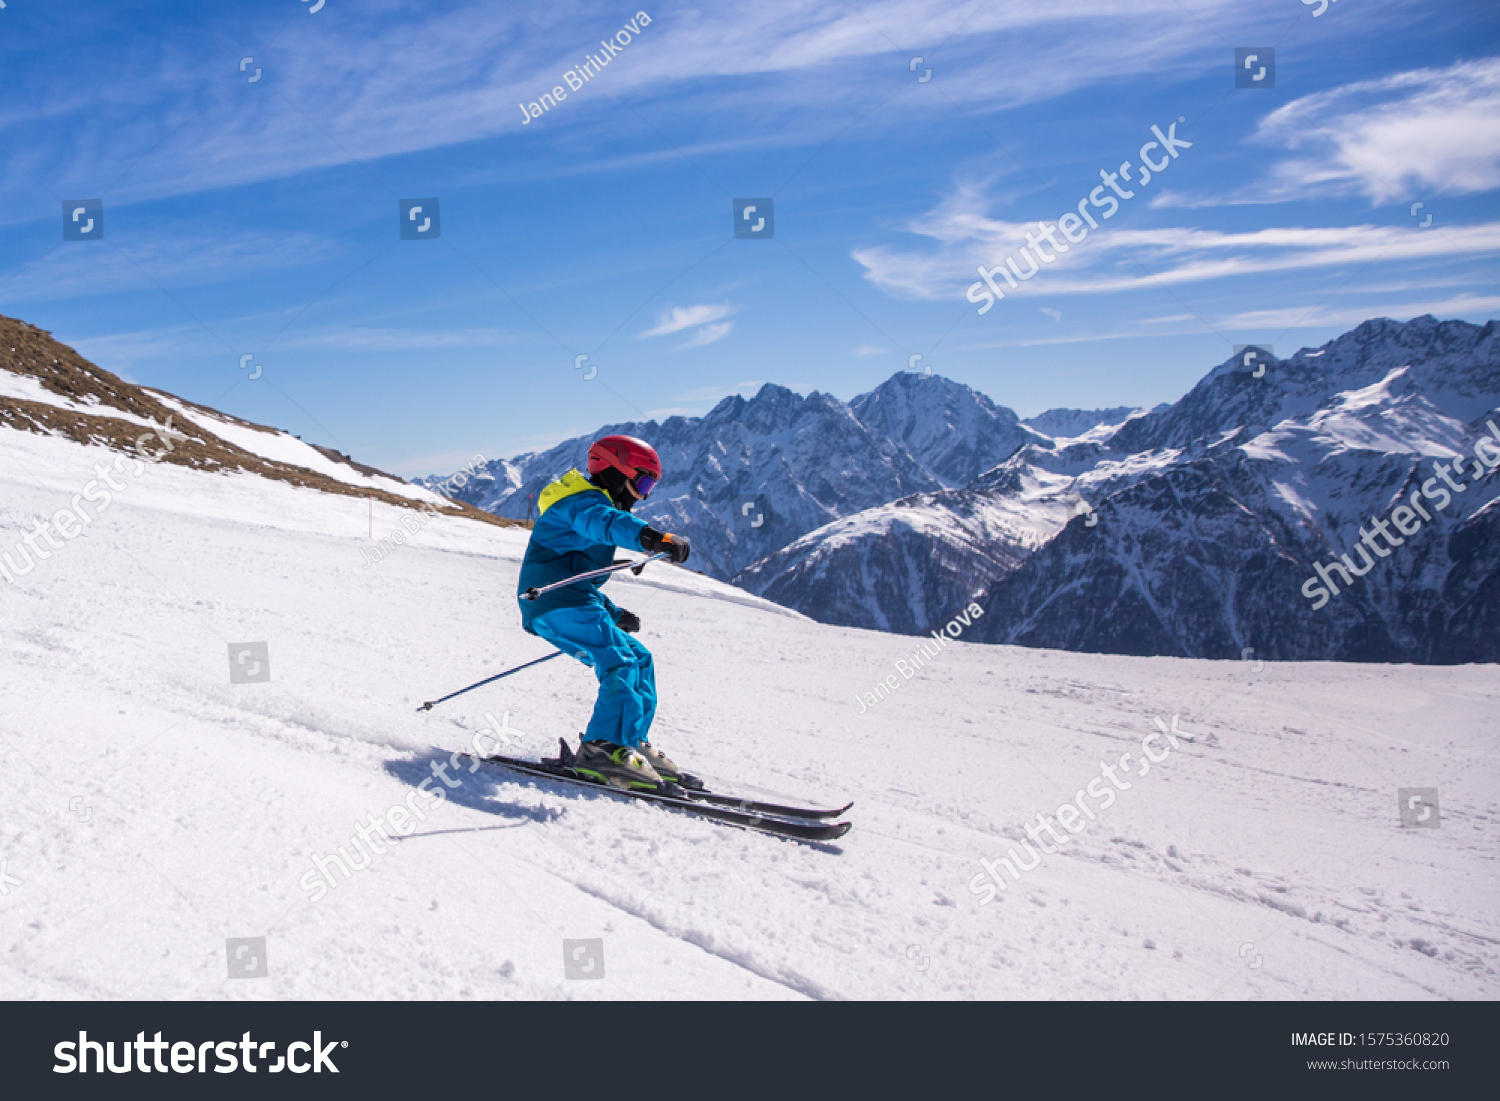 Little boy in blue and yellow ski costume skiing in downhill slope. Winter sport recreational activity #1575360820